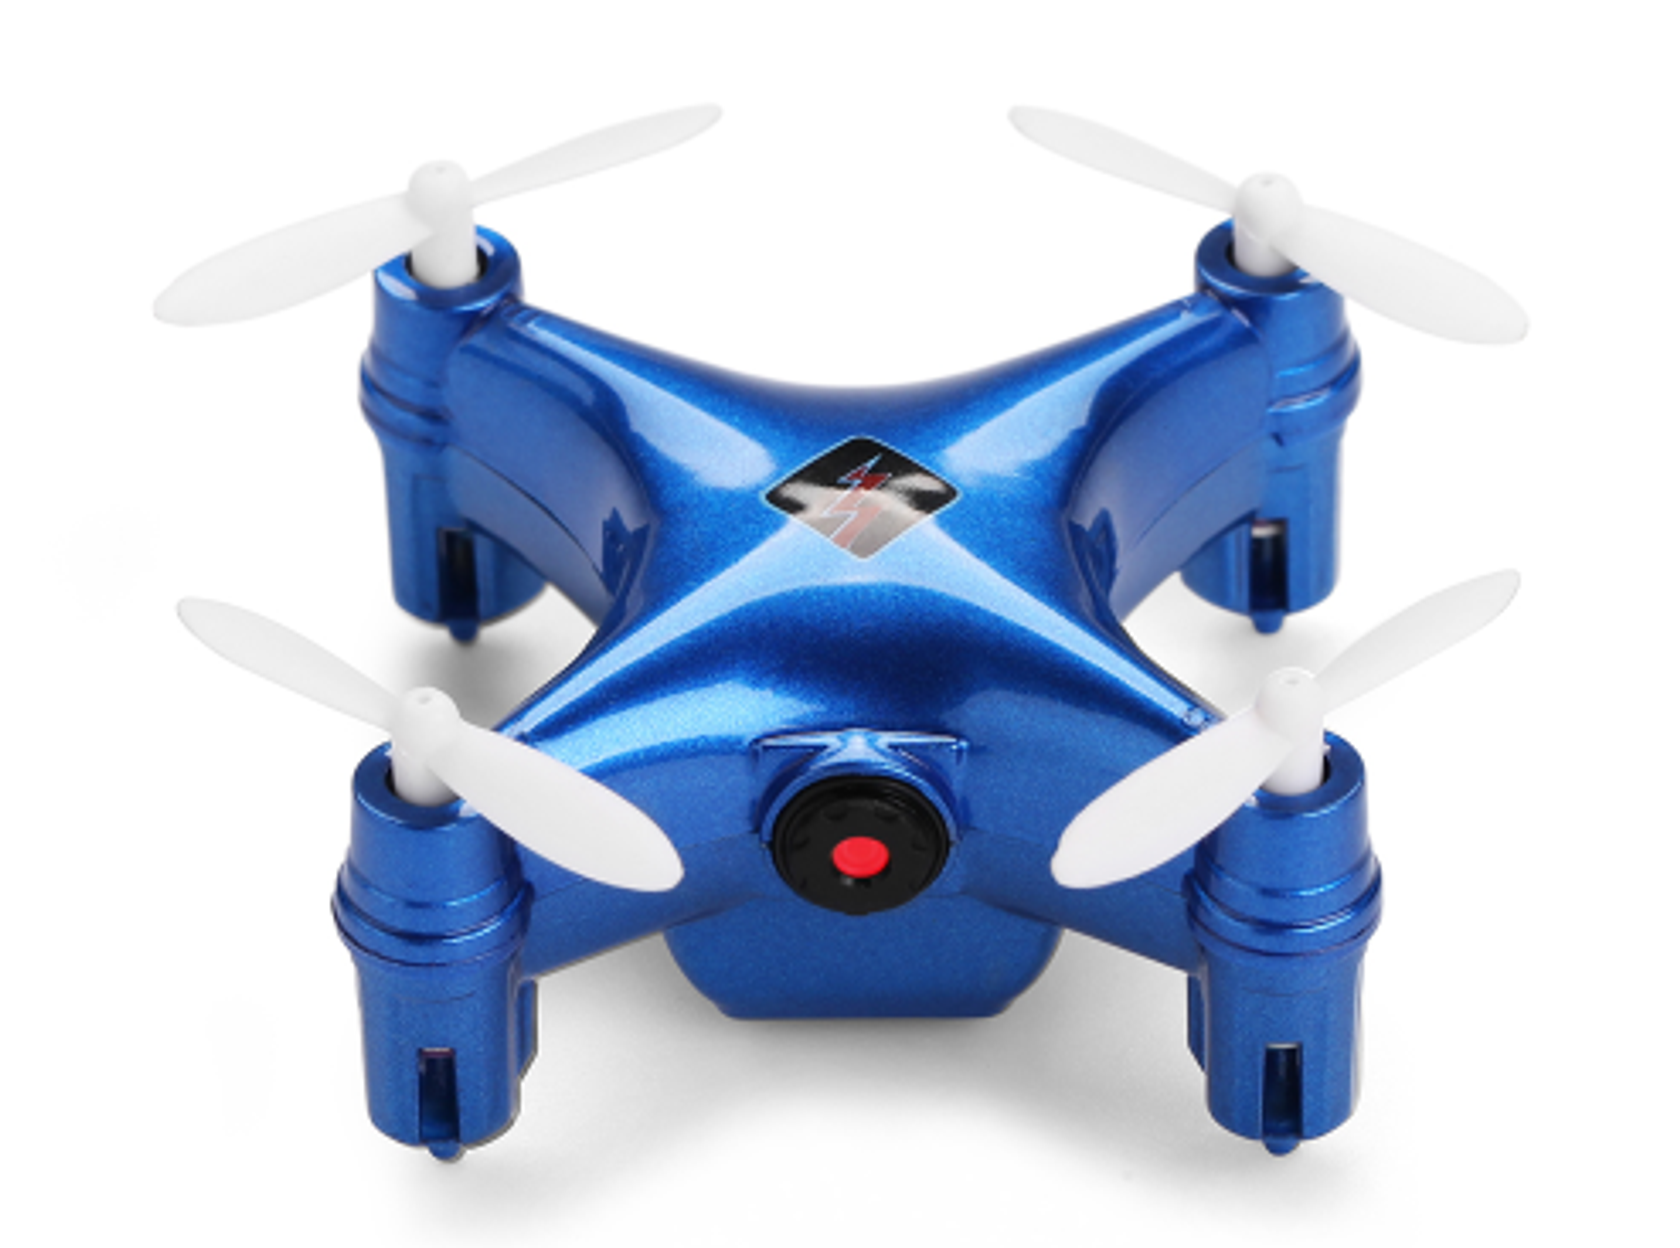 15 Top Drones Under 500 With Camera 2021 Best Drone Under 500 Dollars